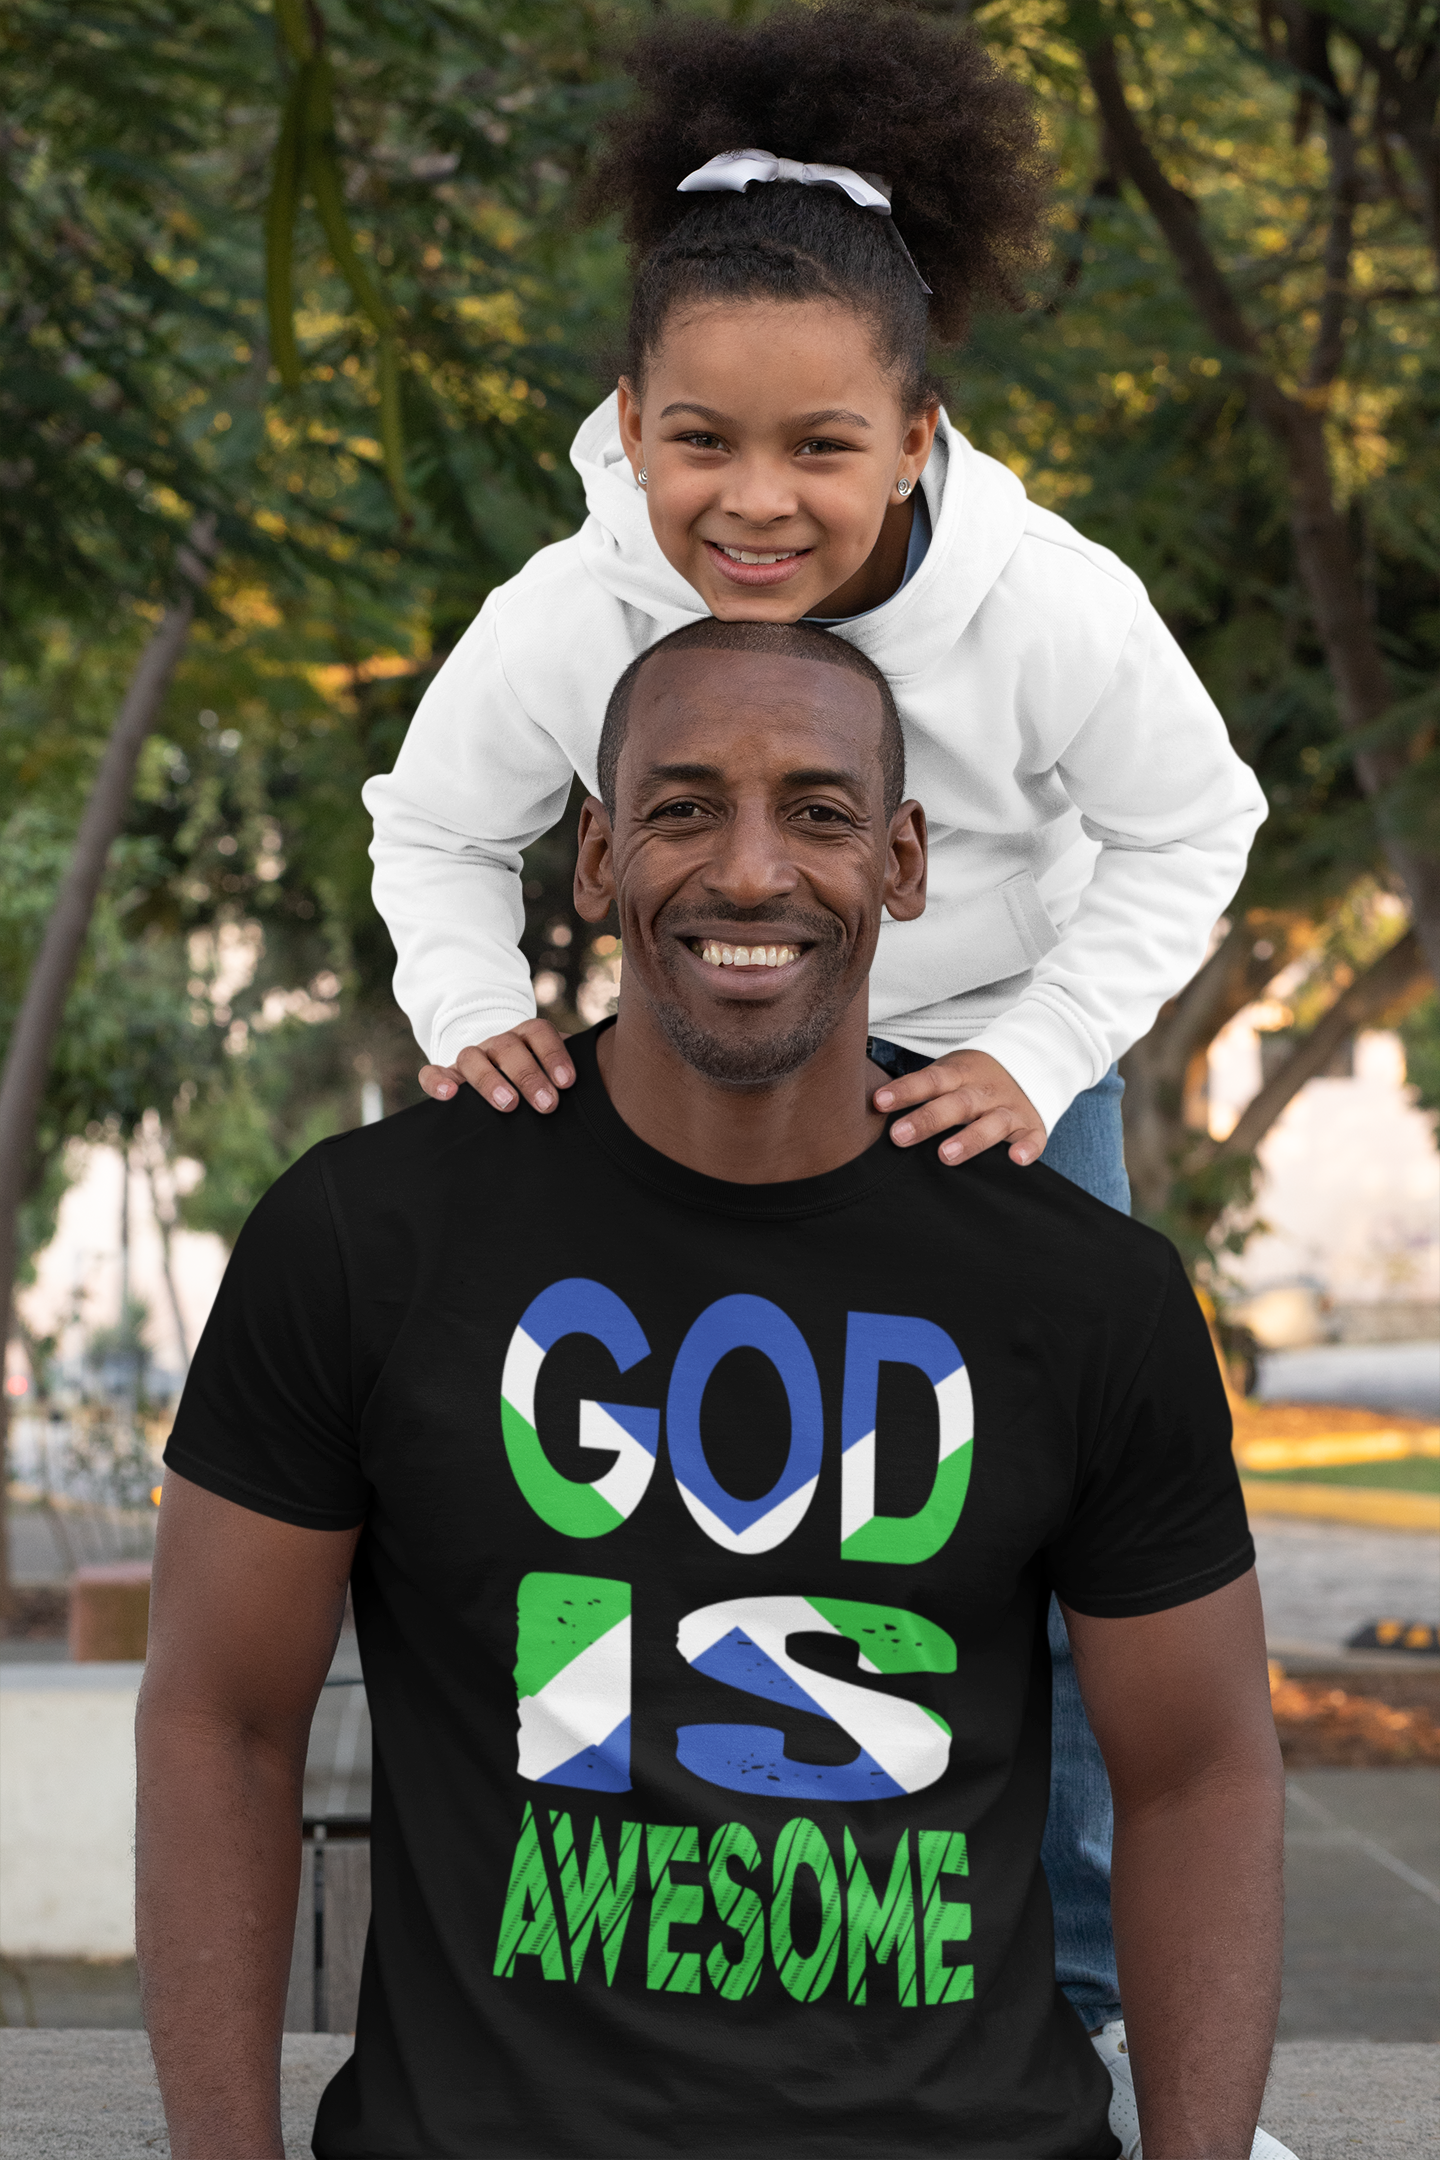 God Is Awesome - T-Shirt